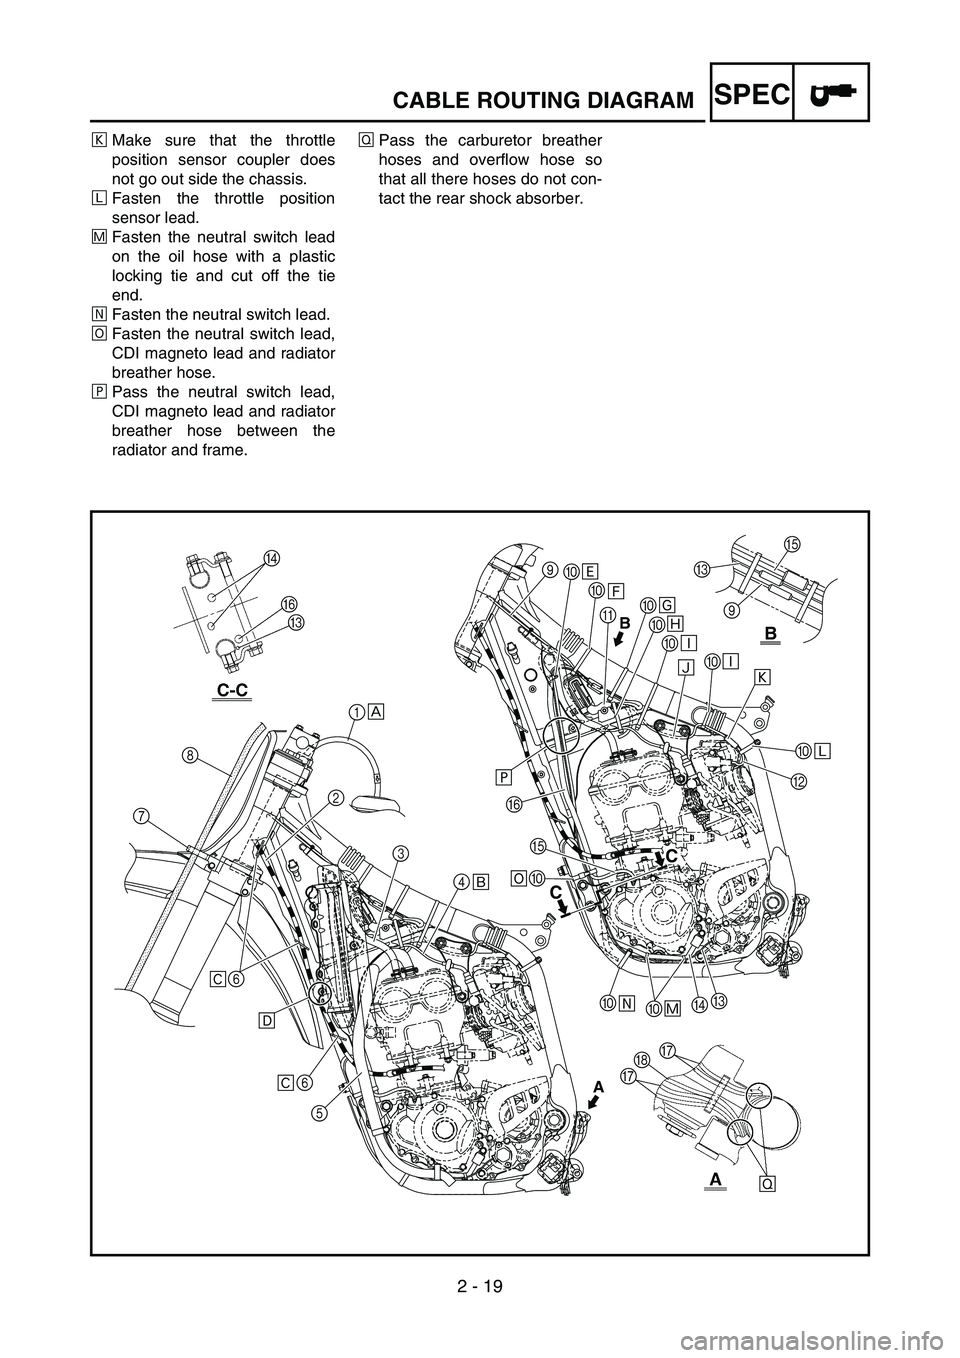 YAMAHA YZ250F 2005  Betriebsanleitungen (in German) 2 - 19
SPECCABLE ROUTING DIAGRAM
ÒMake sure that the throttle
position sensor coupler does
not go out side the chassis.
ÓFasten the throttle position
sensor lead.
ÔFasten the neutral switch lead
on